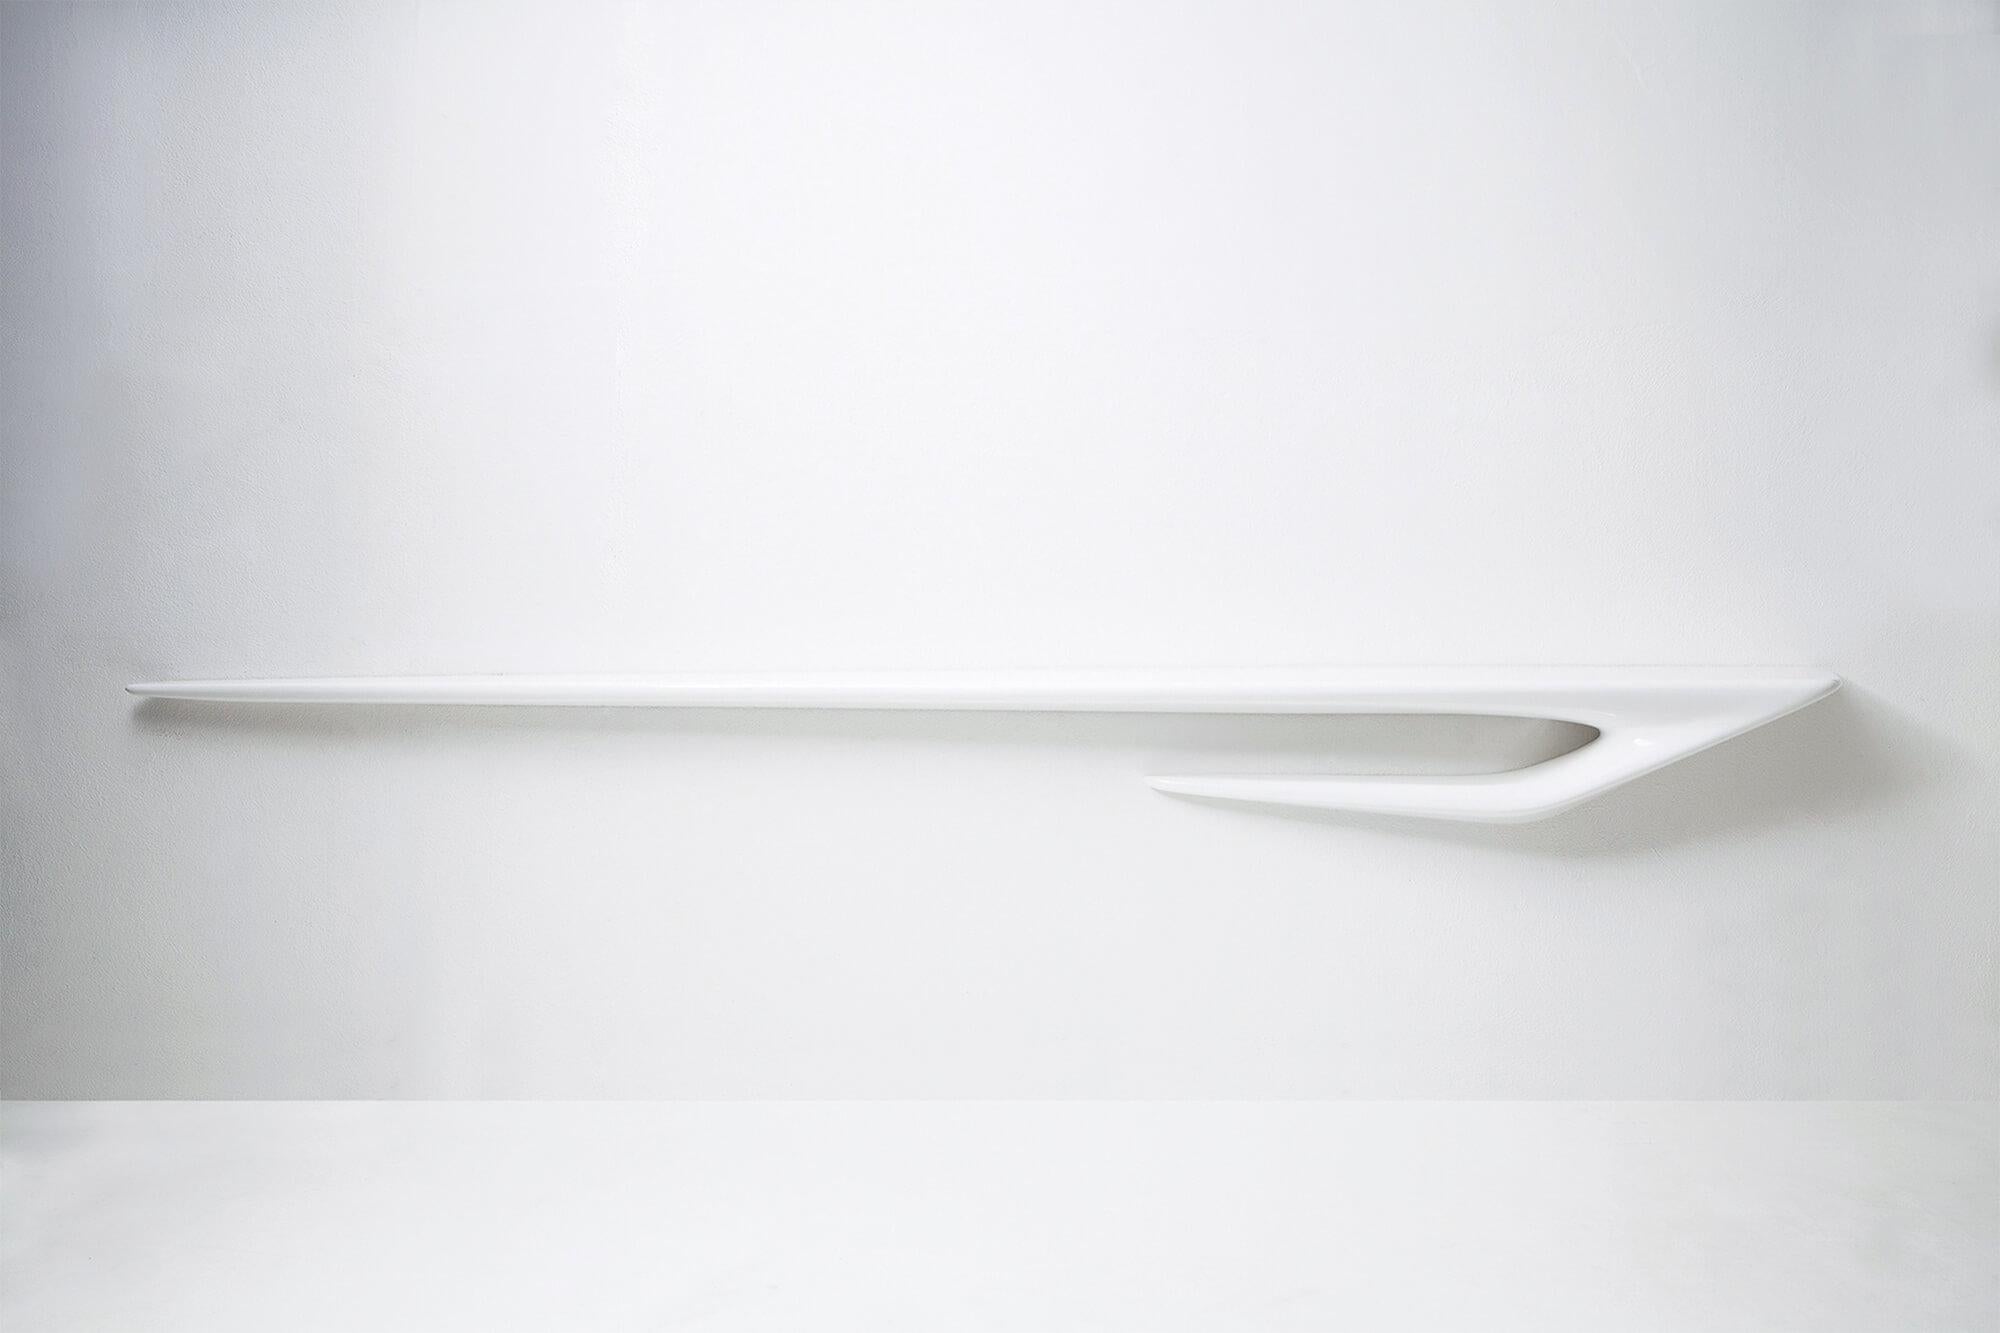 Part of the Seamless collection by Zaha Hadid, the Serif Limited Edition series of shelves are dynamic forms that interact when combined. These wall-mounted masterpieces are a fluid extension of ?the drawn line that has been translated ?into three